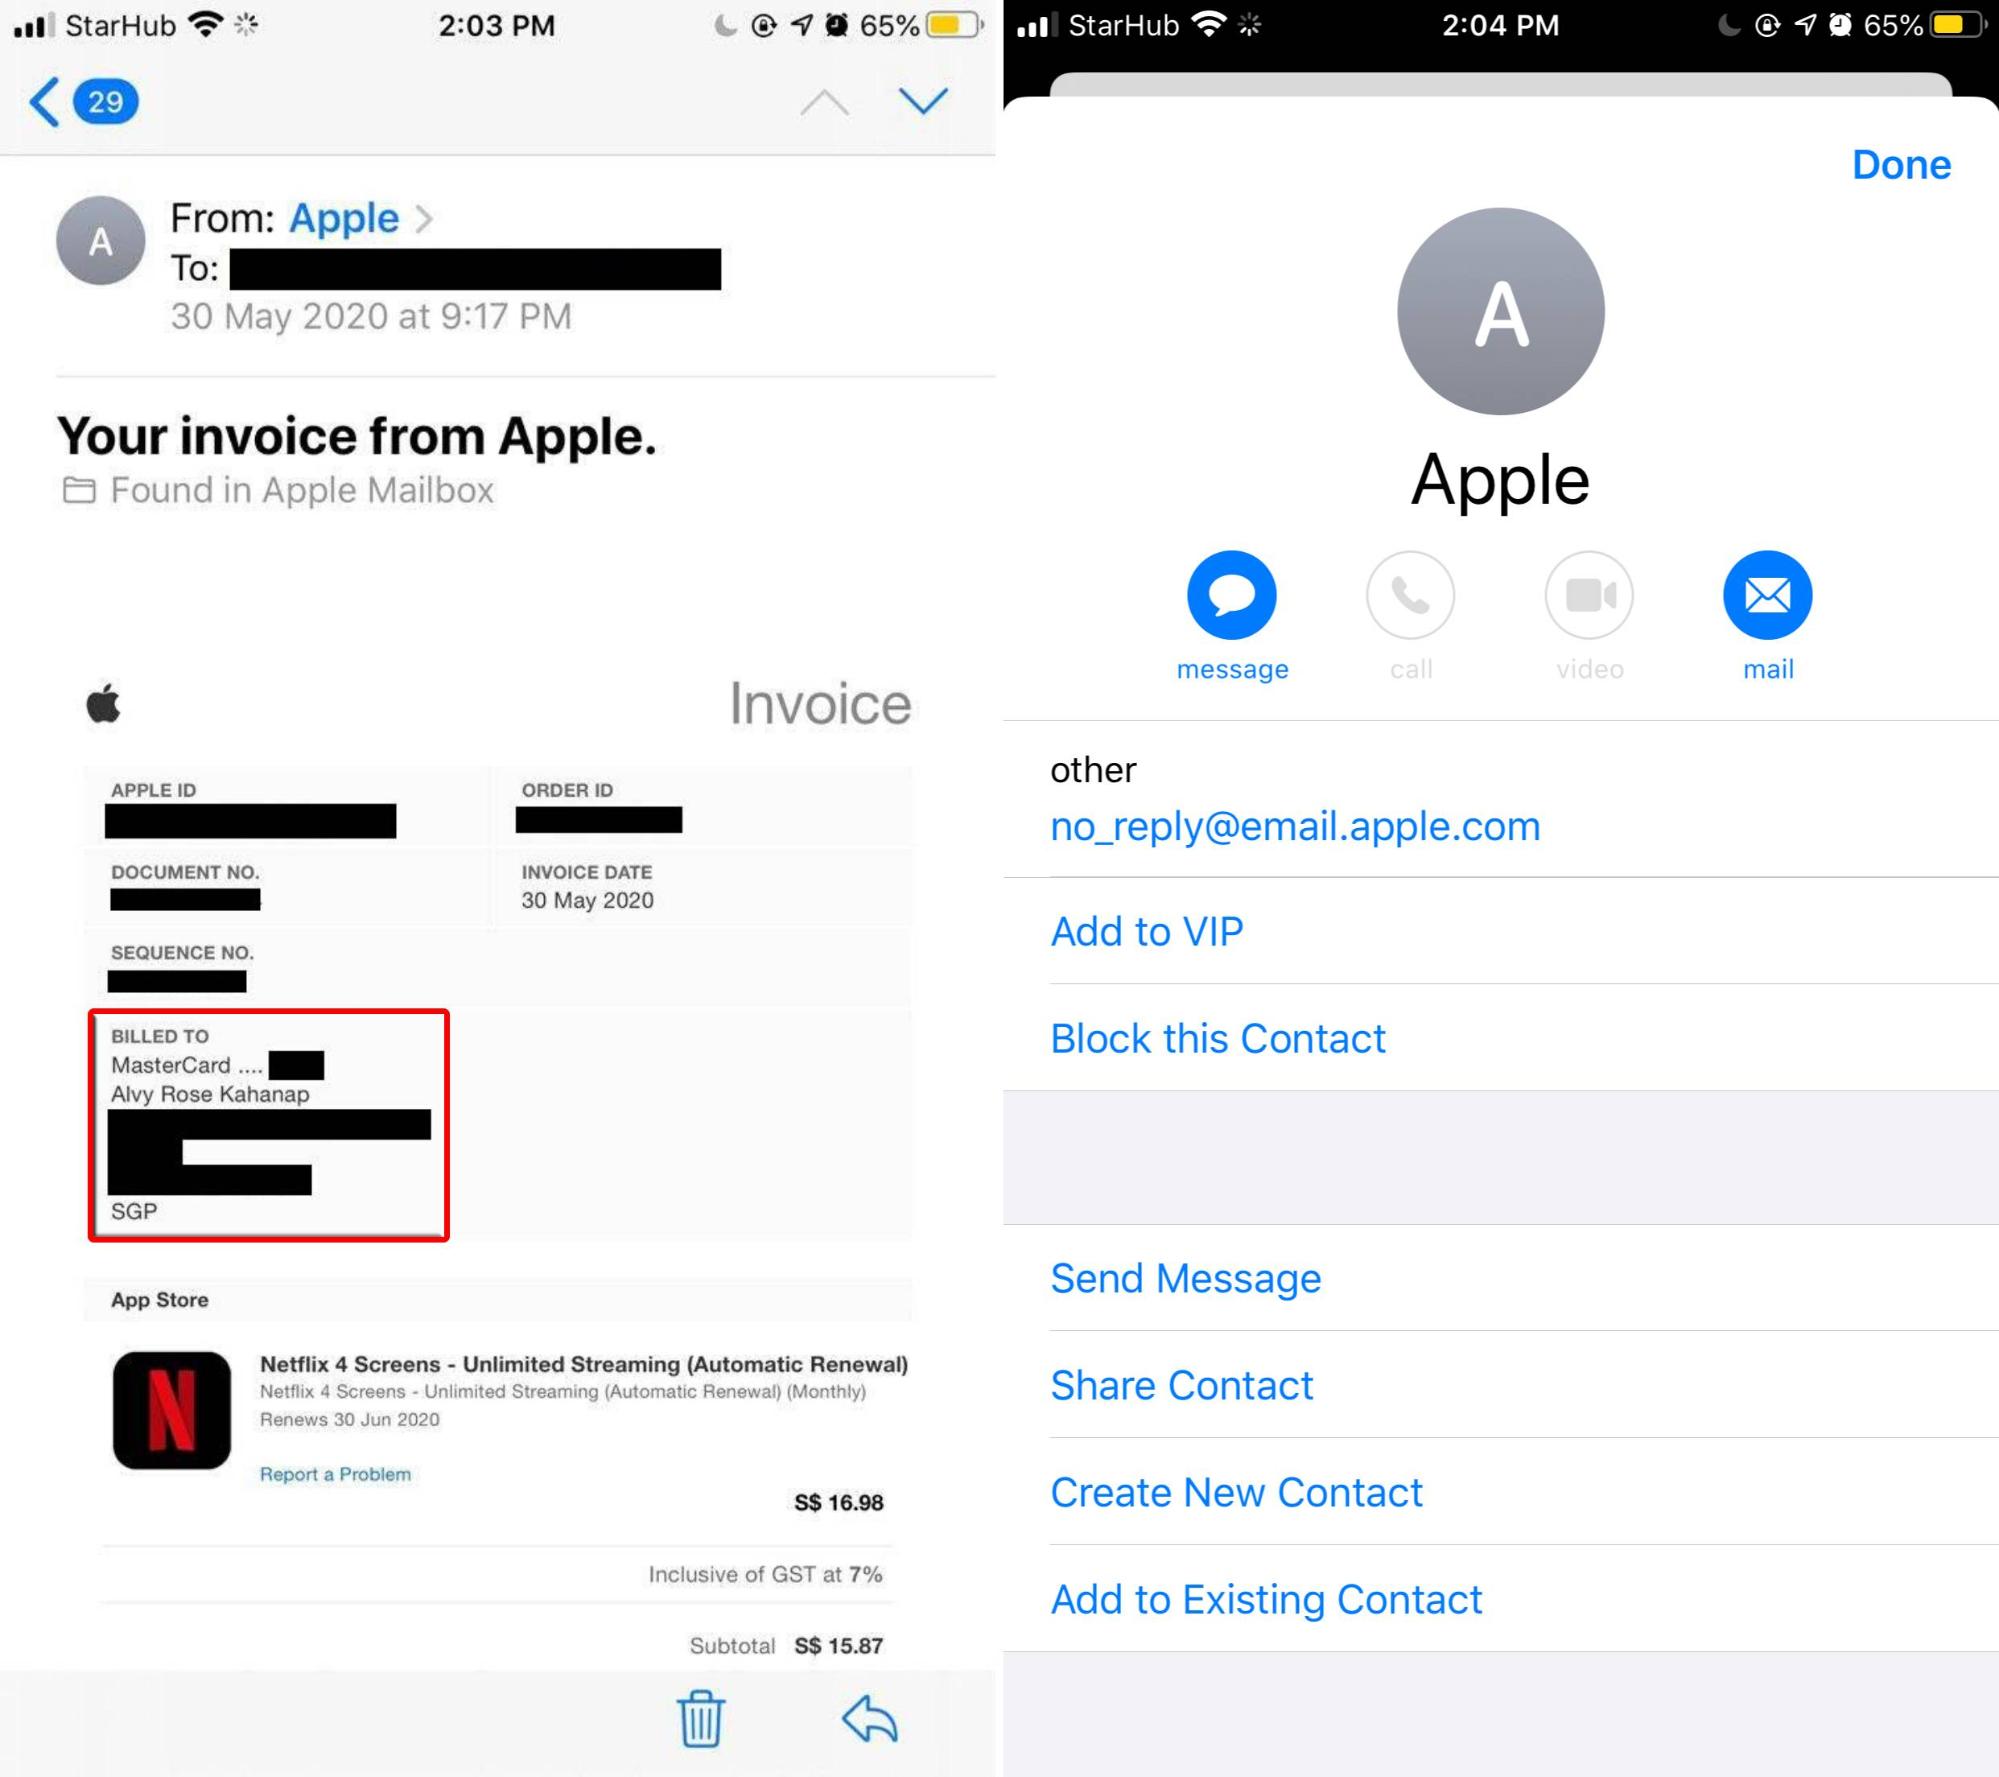 common scams in Singapore - how to spot genuine Apple support emails 